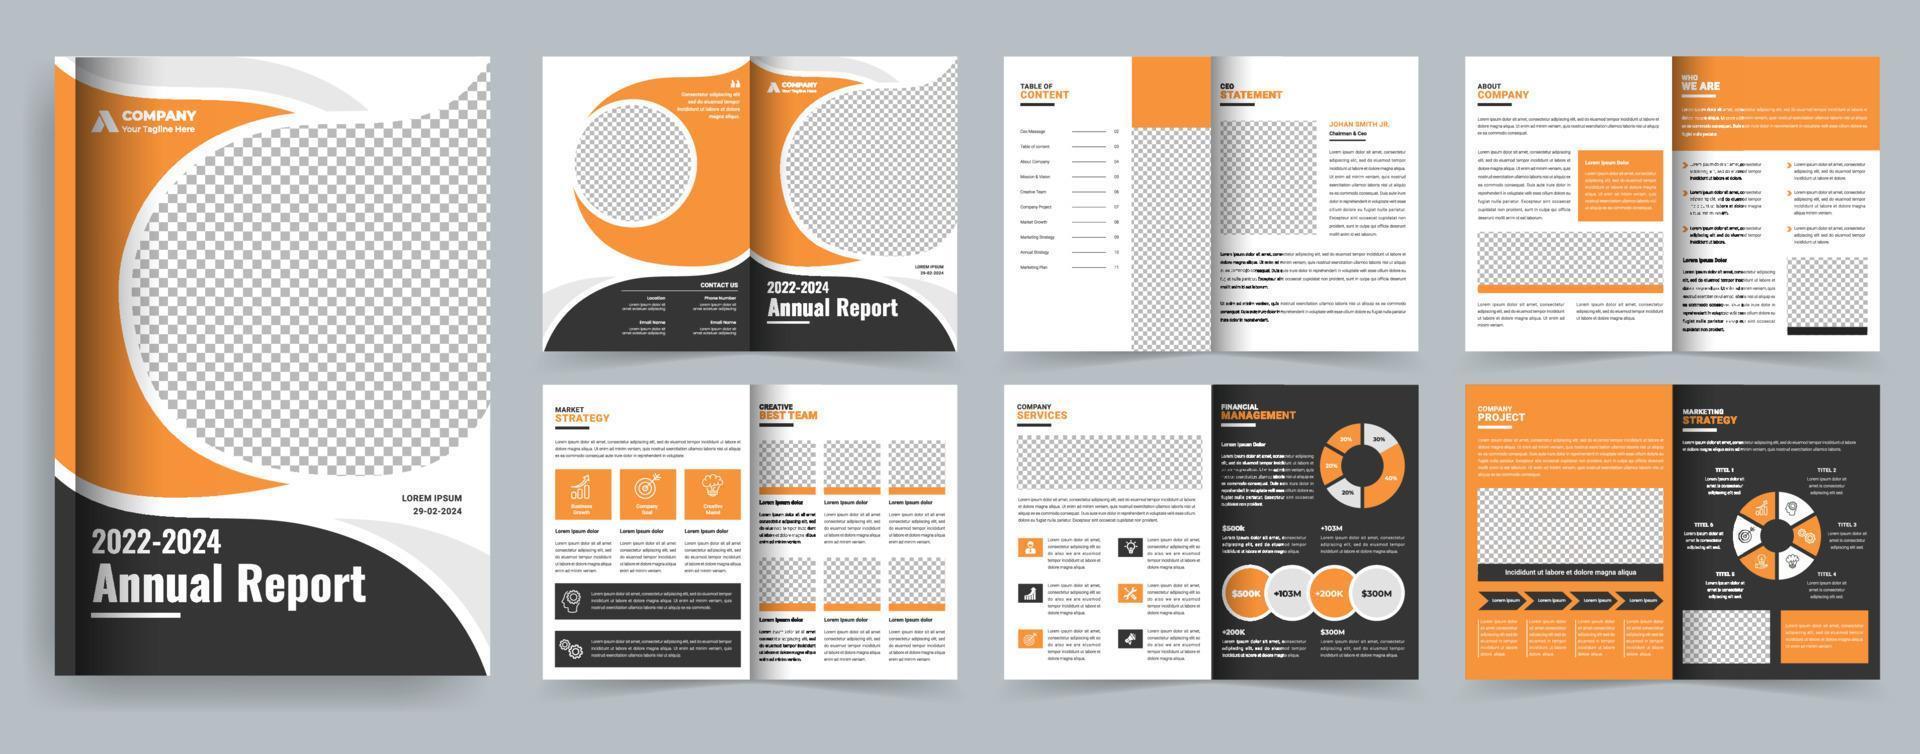 Yellow business brochure template and annual report or company profile or project proposal layout design template vector